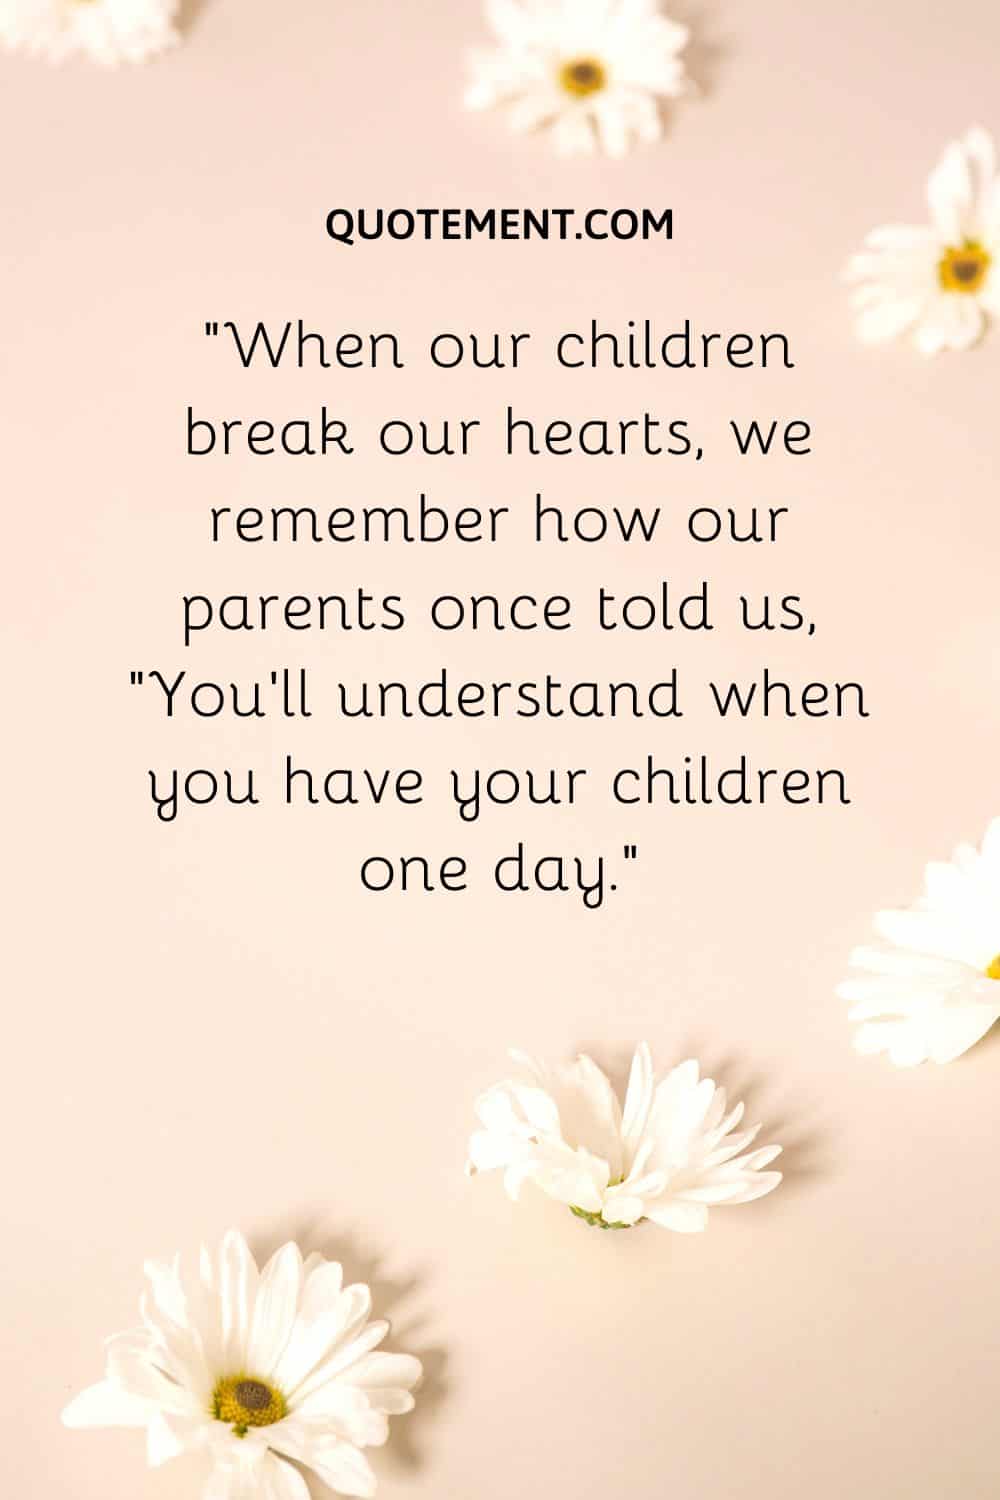 When our children break our hearts, we remember how our parents once told us, “You’ll understand when you have your children one day.